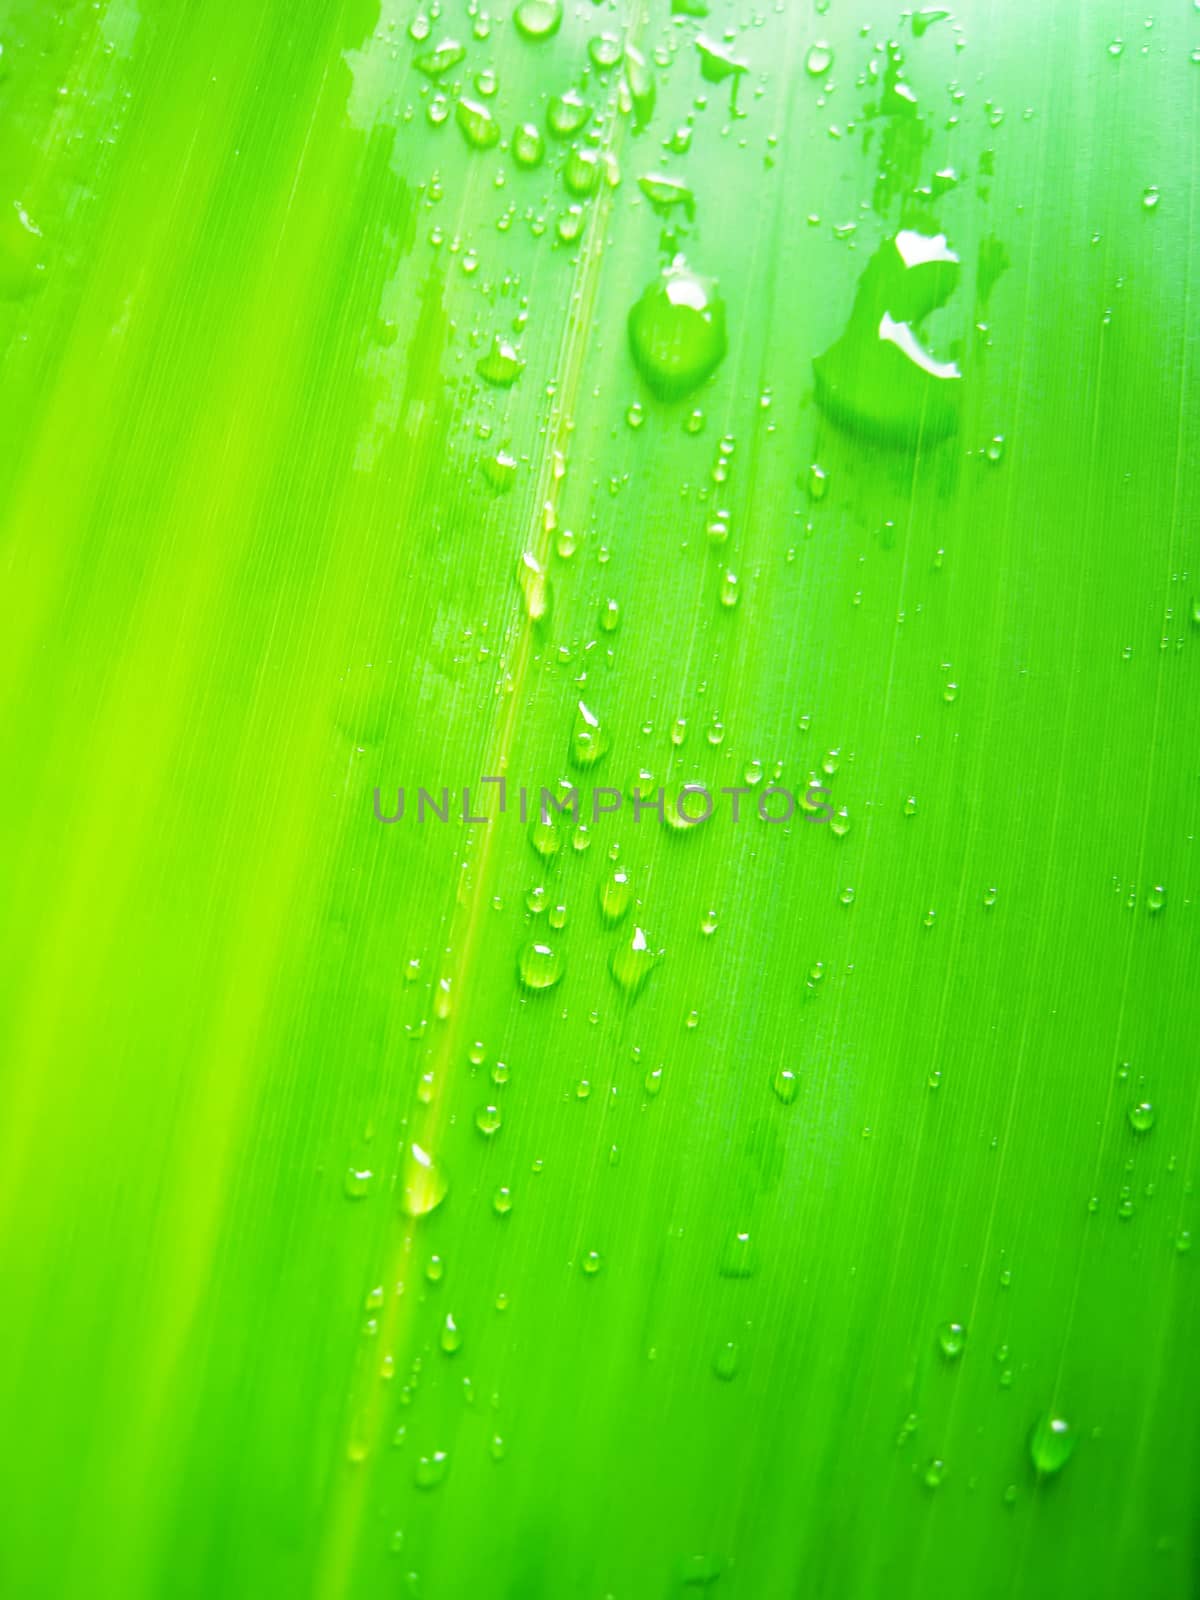 dew drops on bamboo leave by dinhngochung